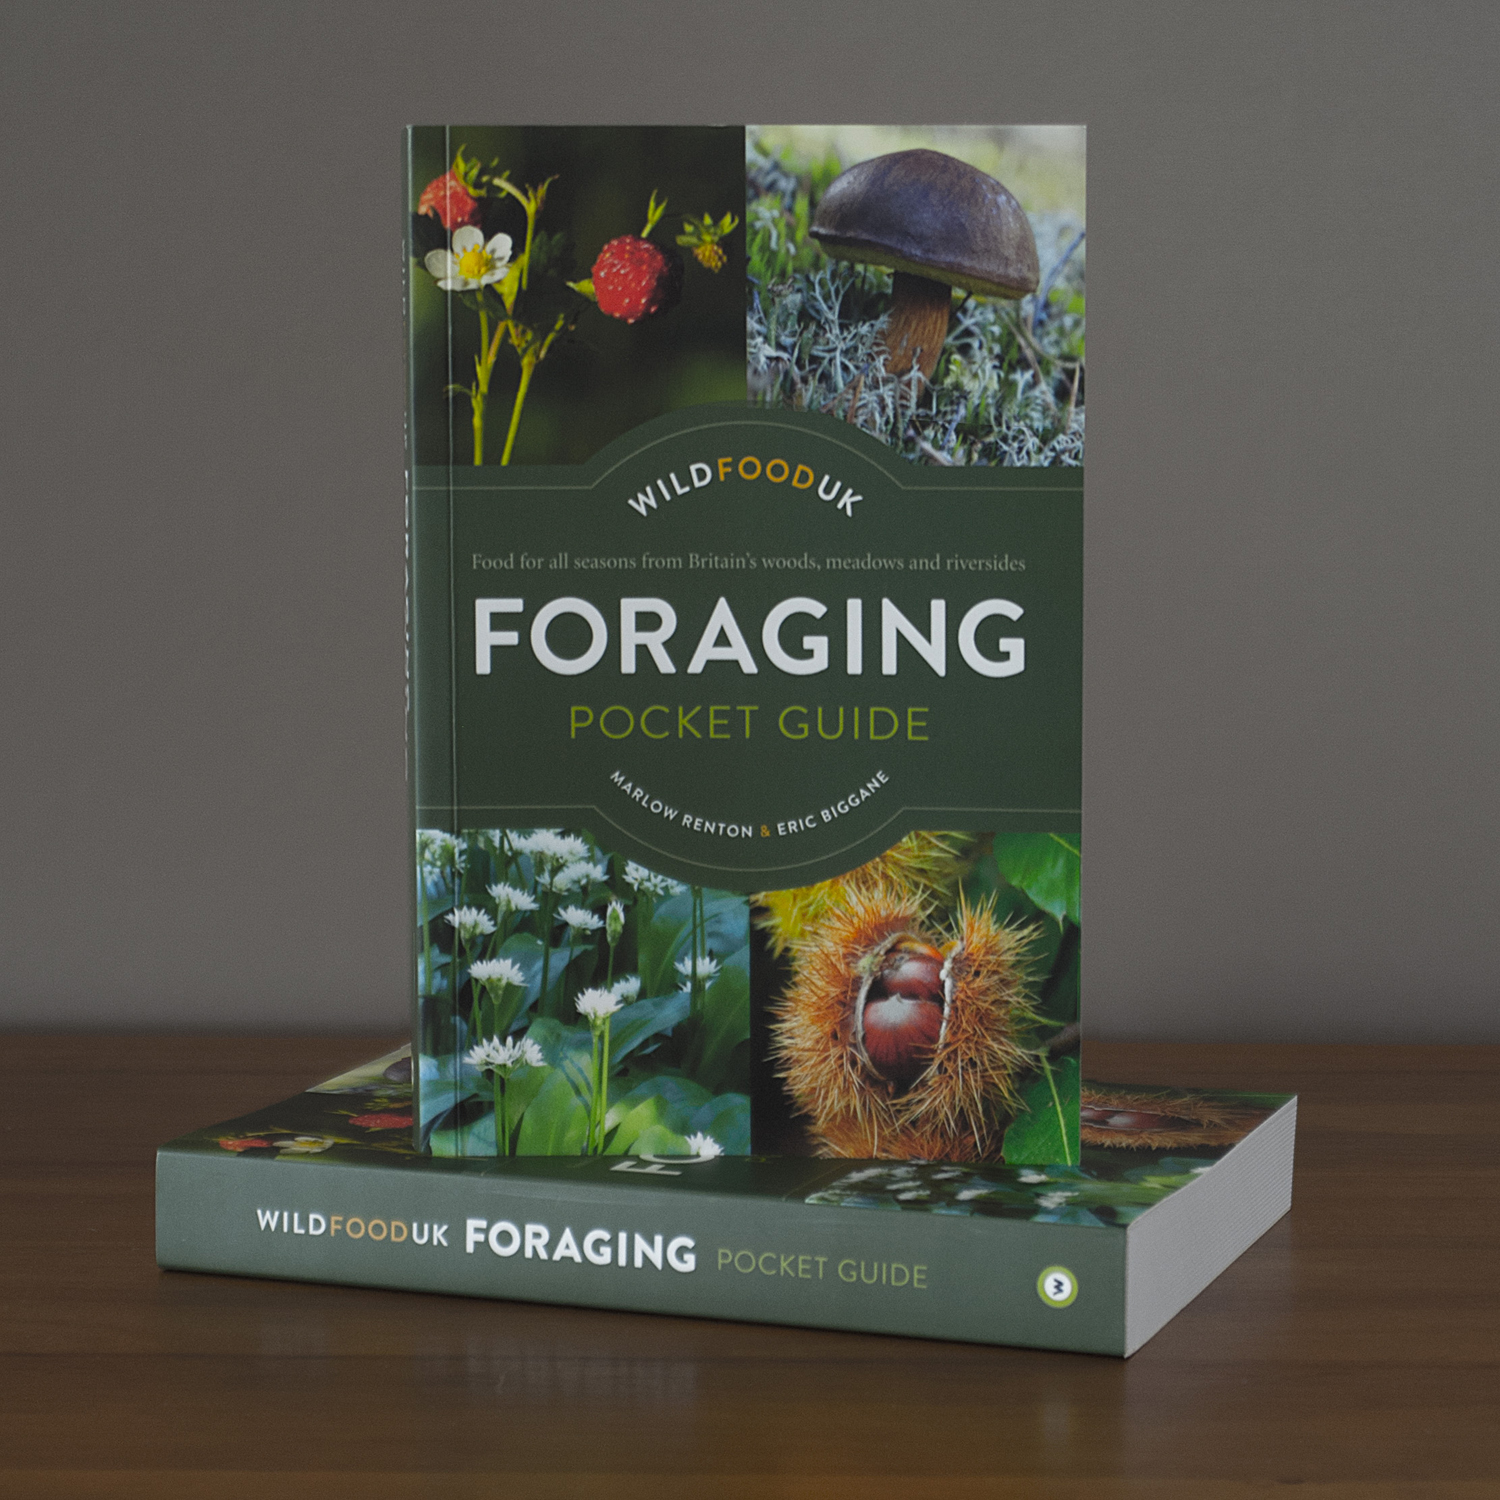 The Wild Food UK Foraging Pocket Guide